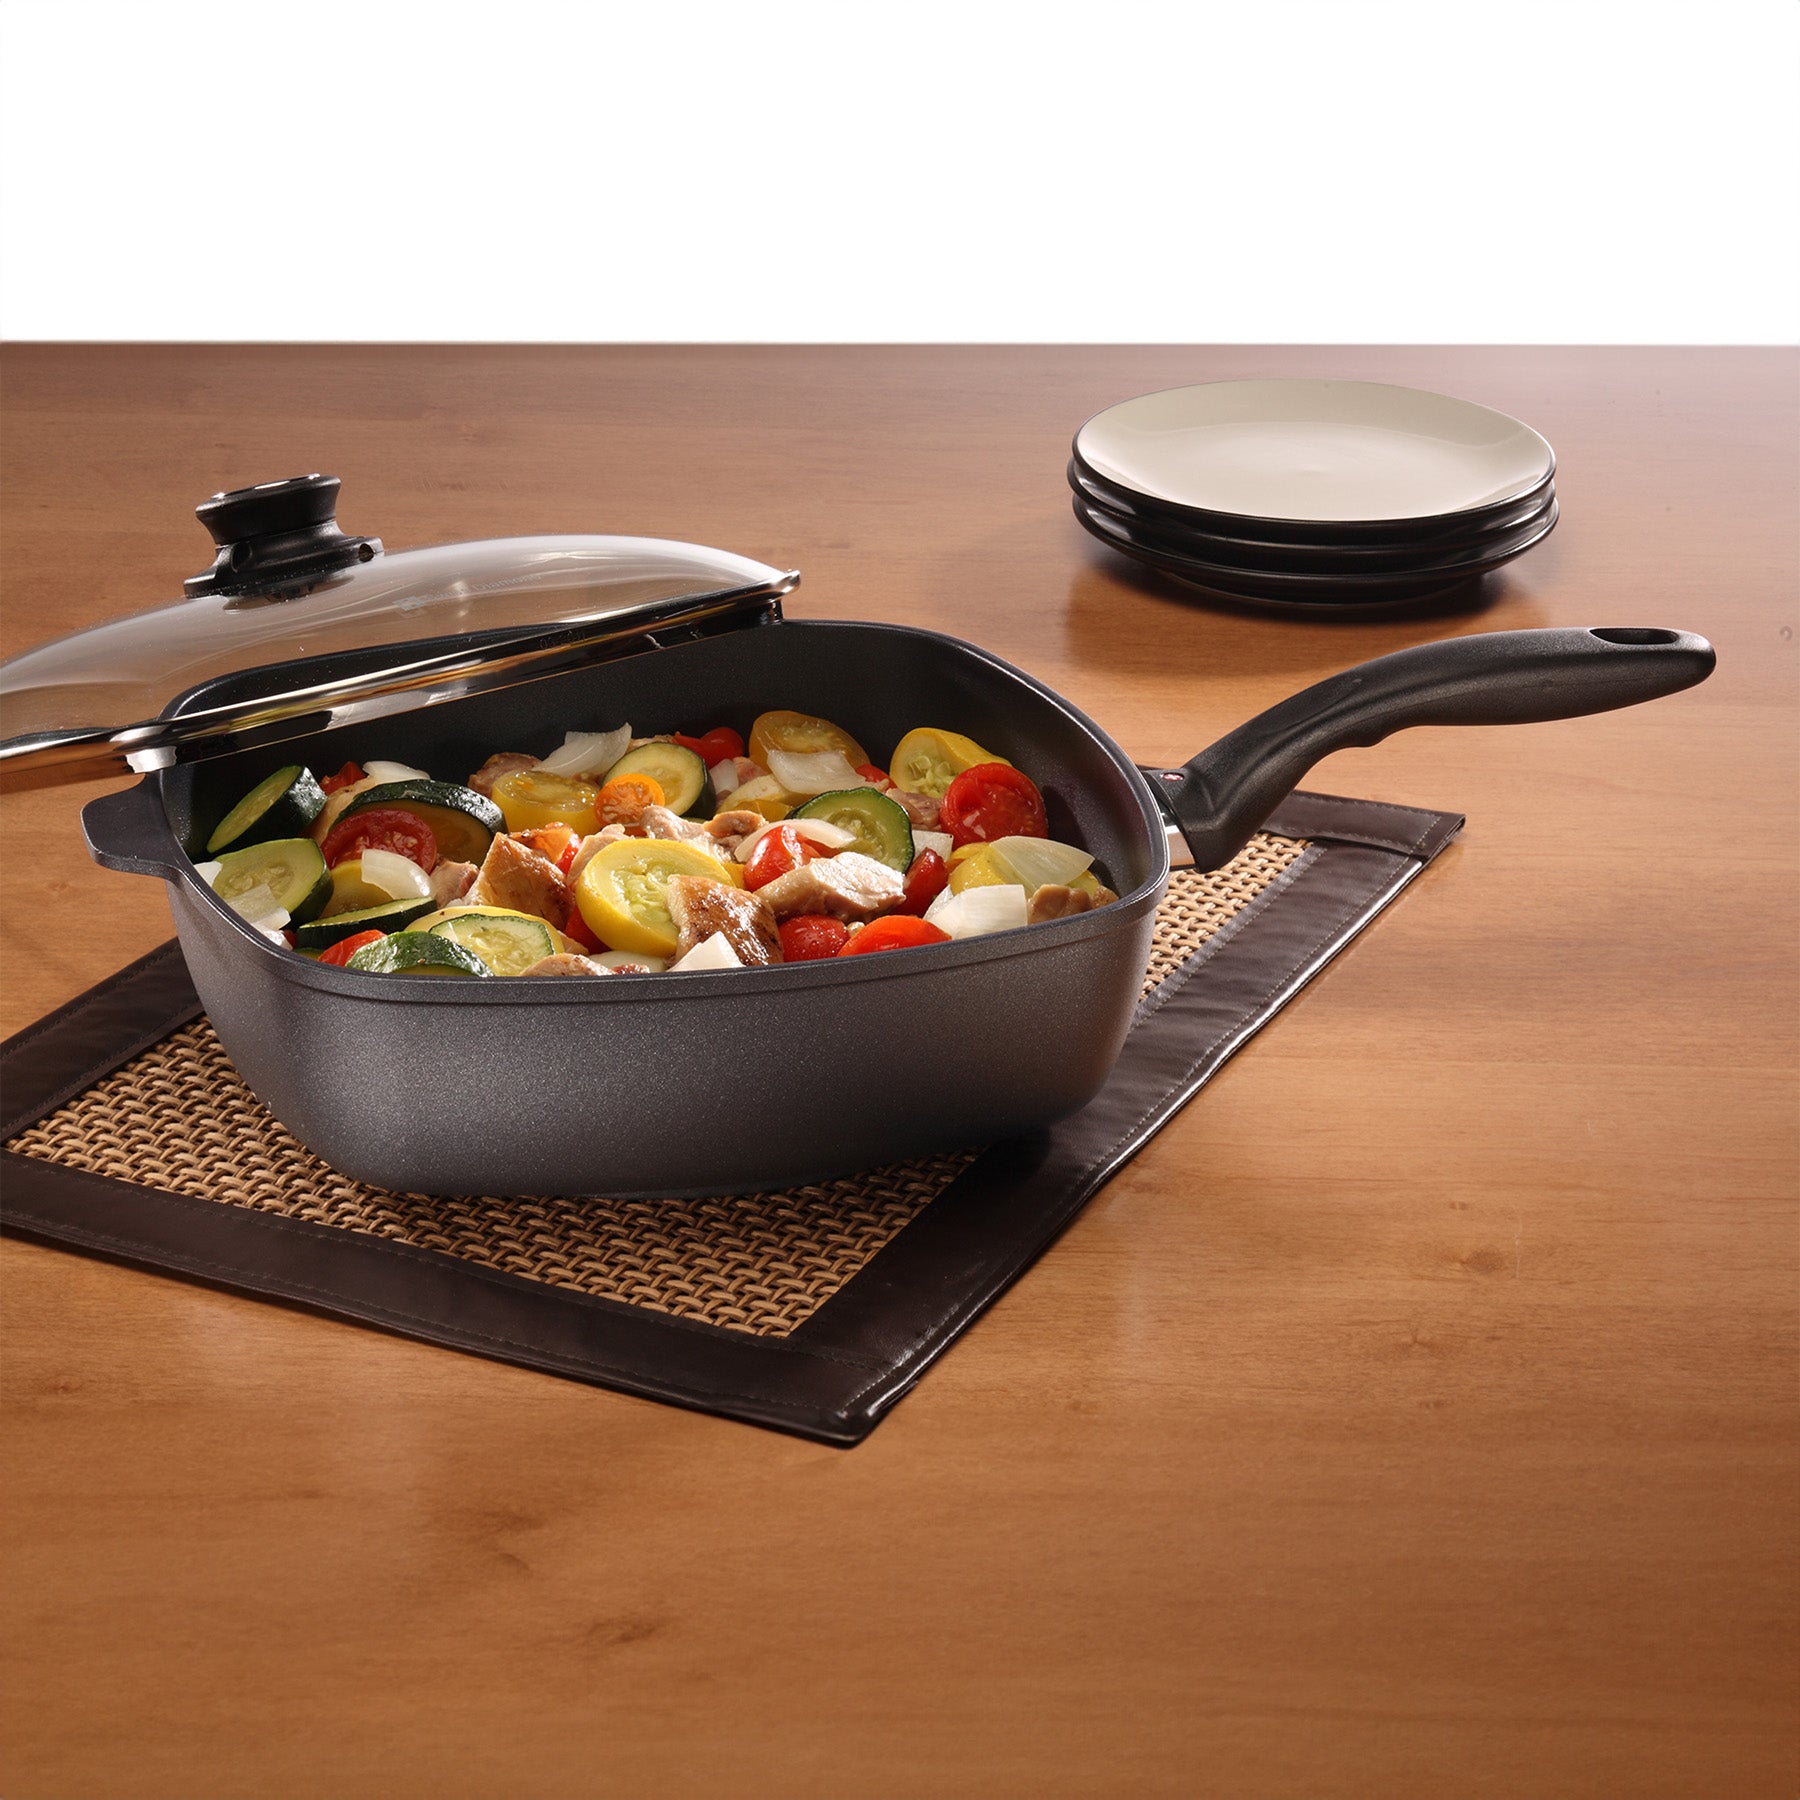 HD Nonstick Square Saute Pan with Glass Lid - Induction in use on wooden dining room table